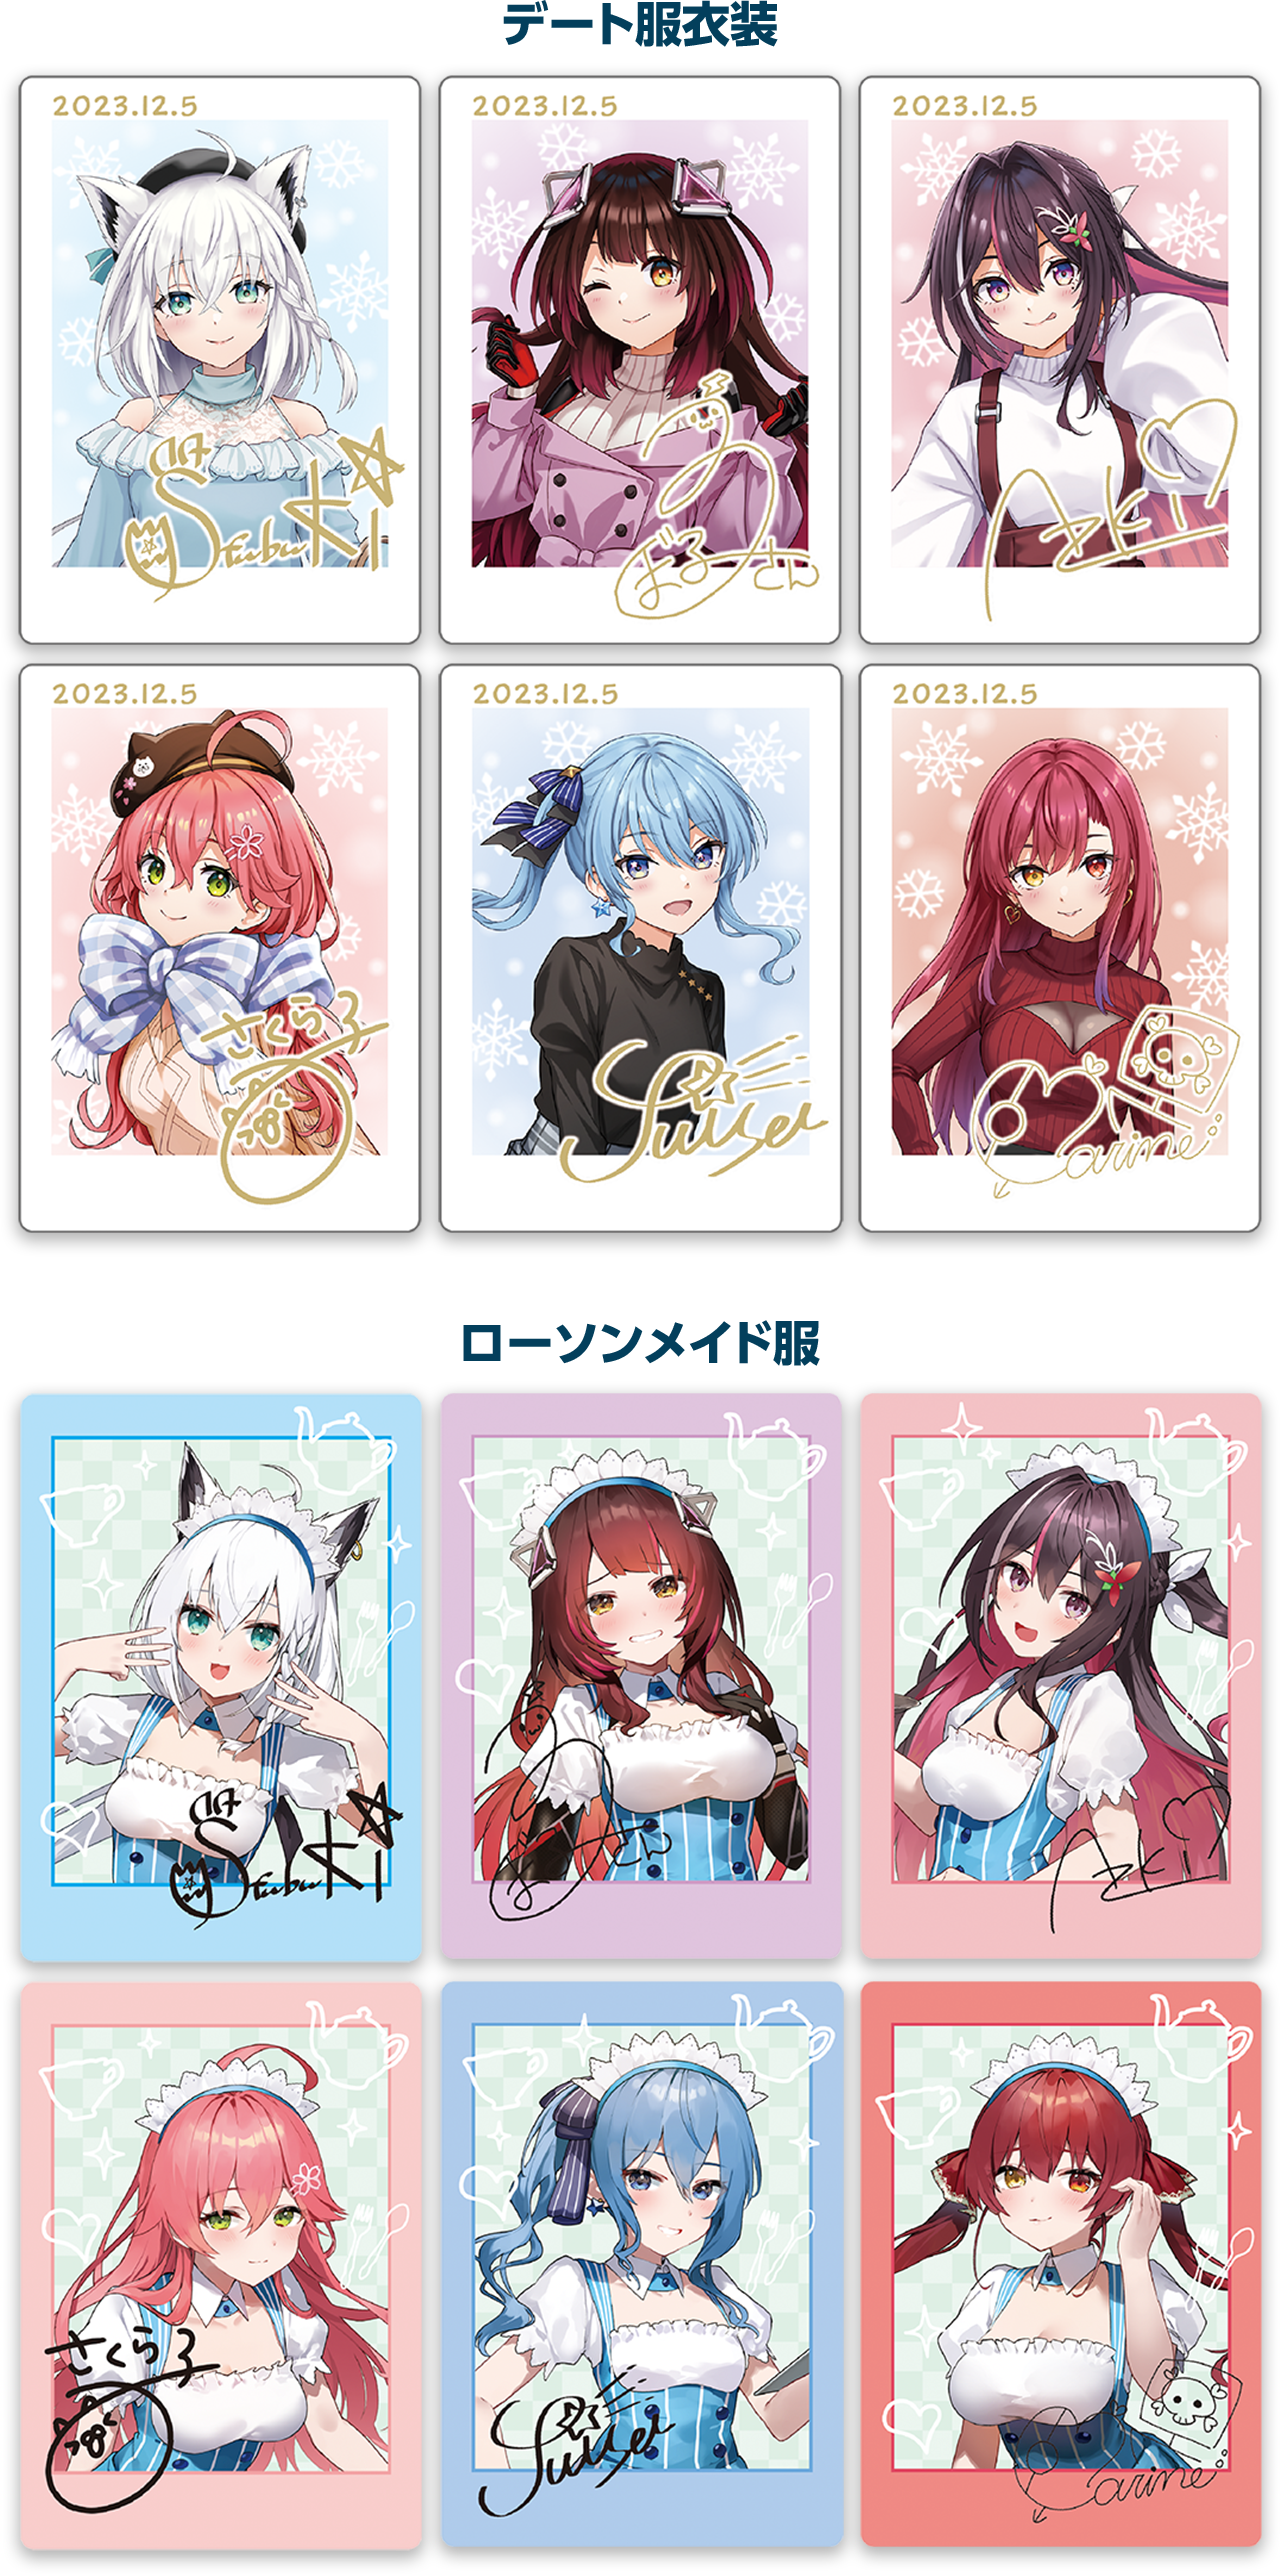 [In-stock] hololive x Lawson Goods (DEC 2023)